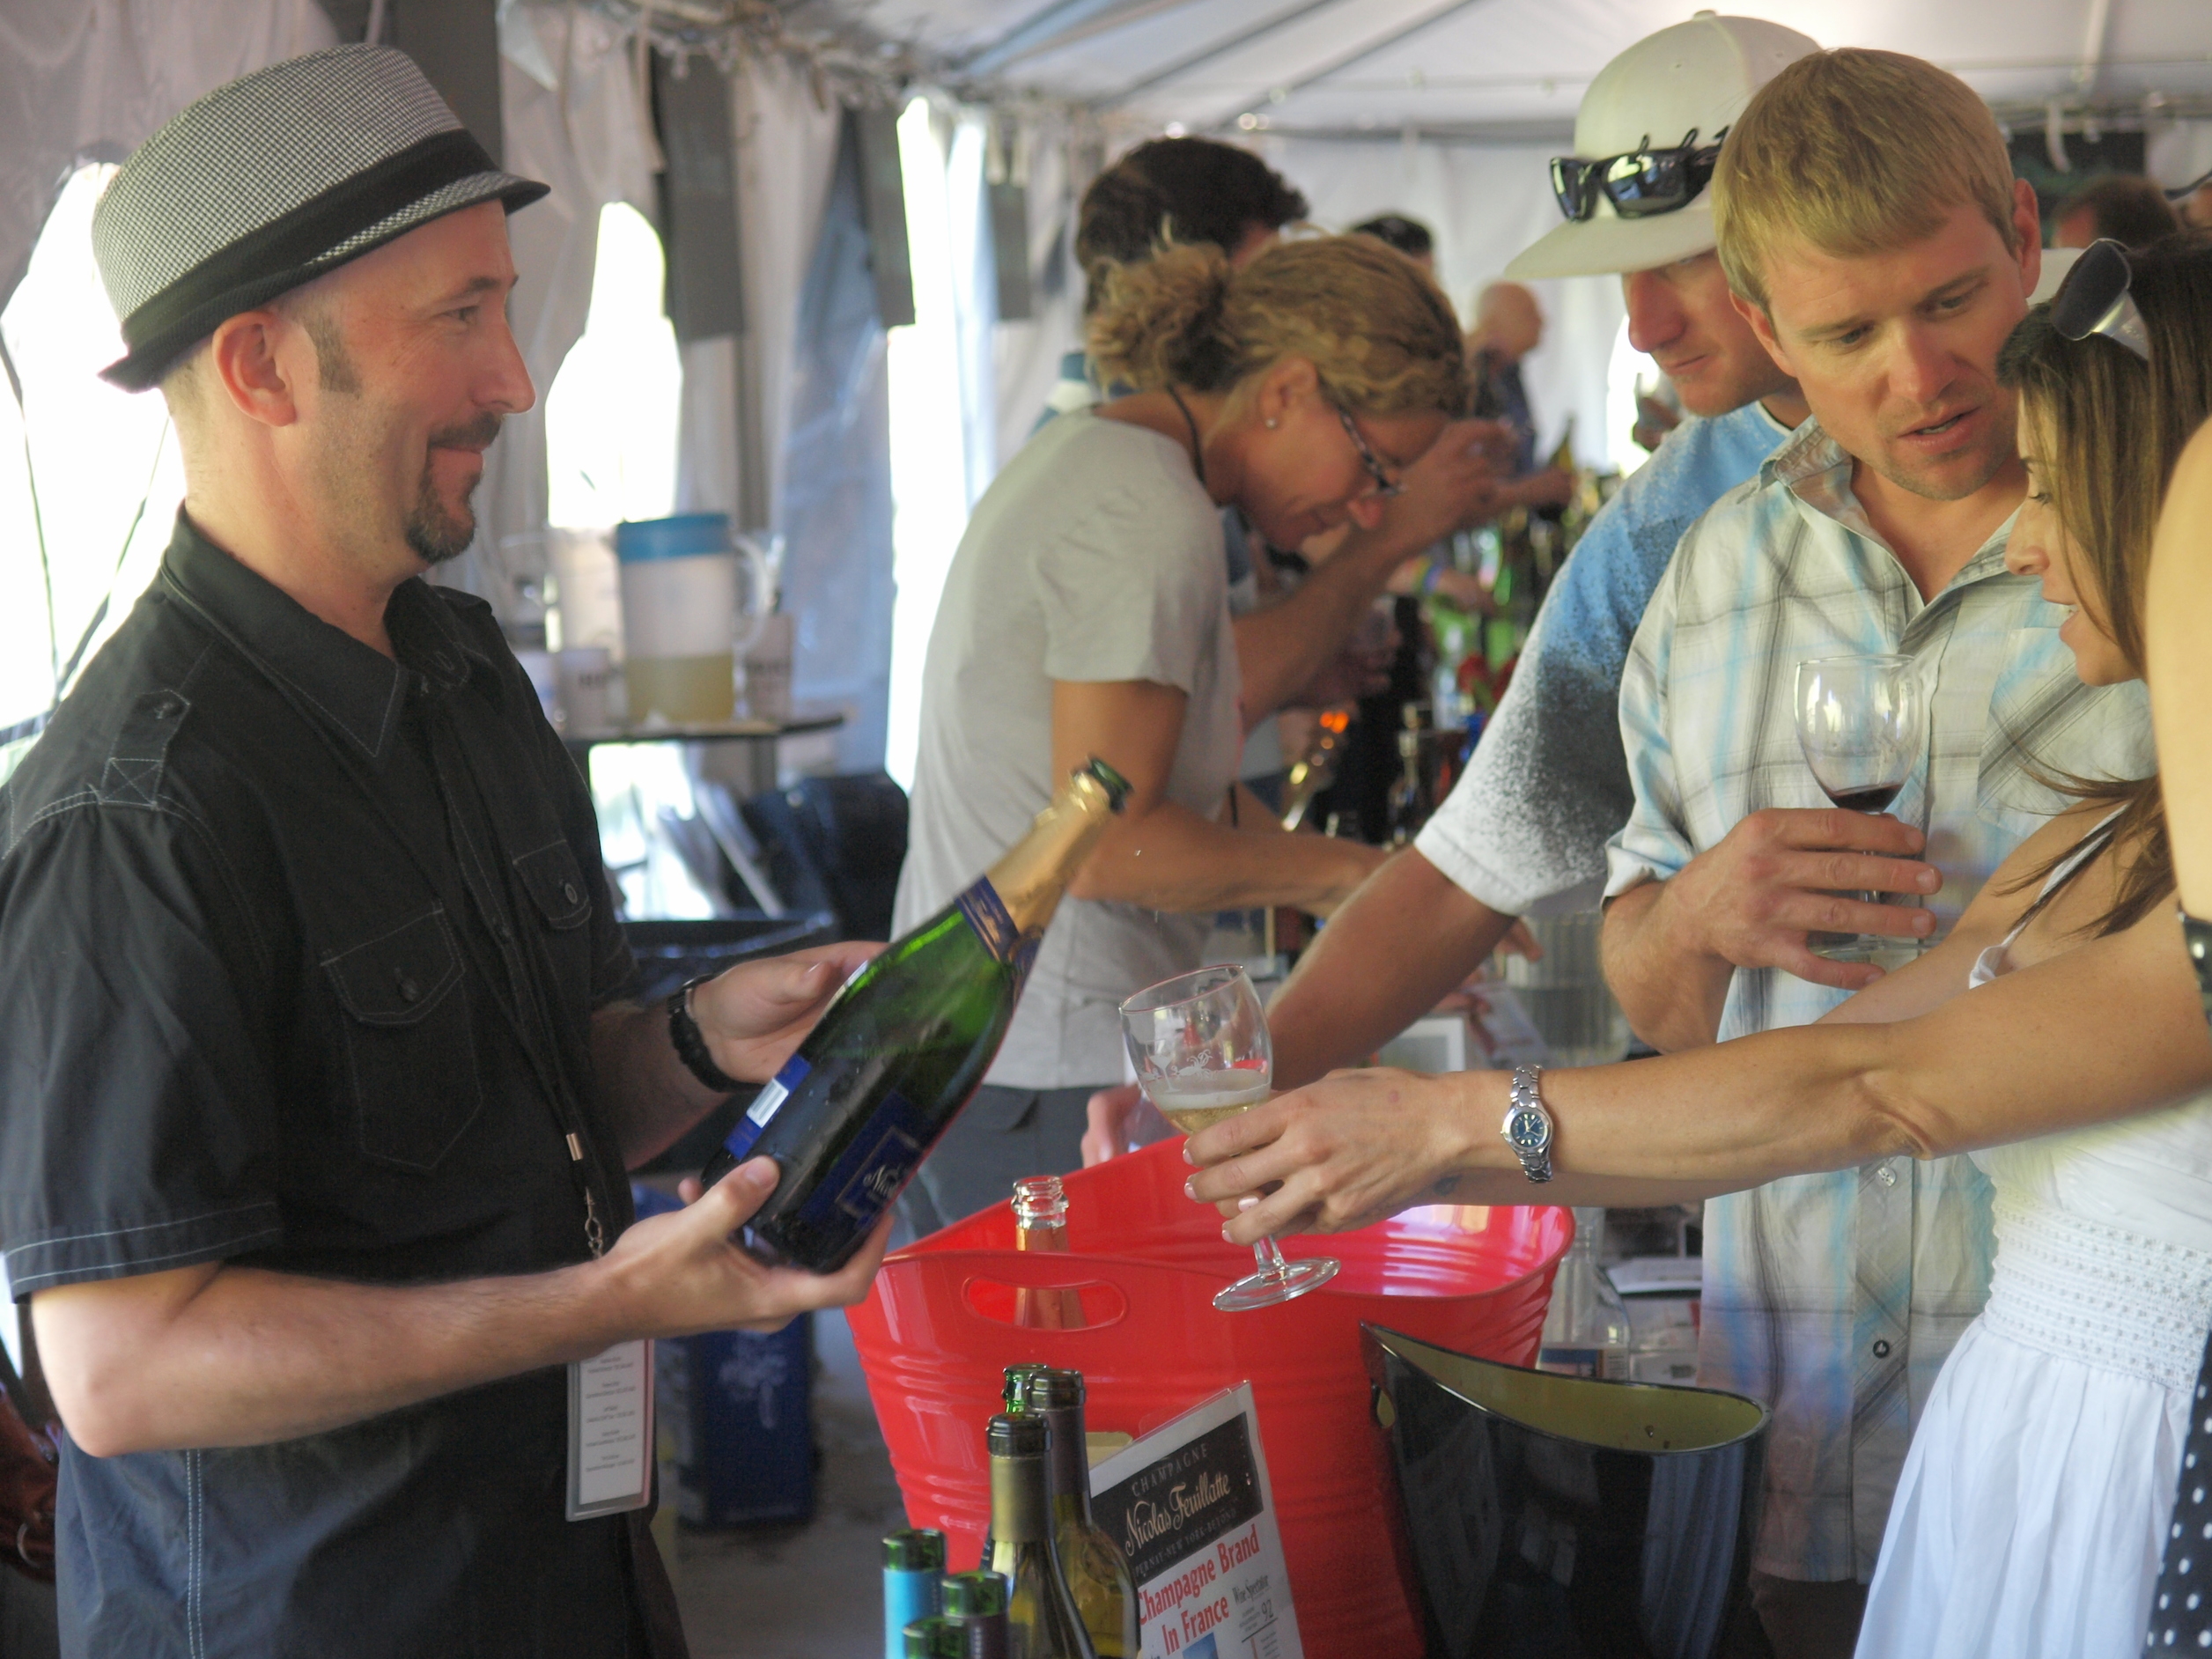 Crested Butte Wine and Food Festival Grand Tasting by Mike Rieger